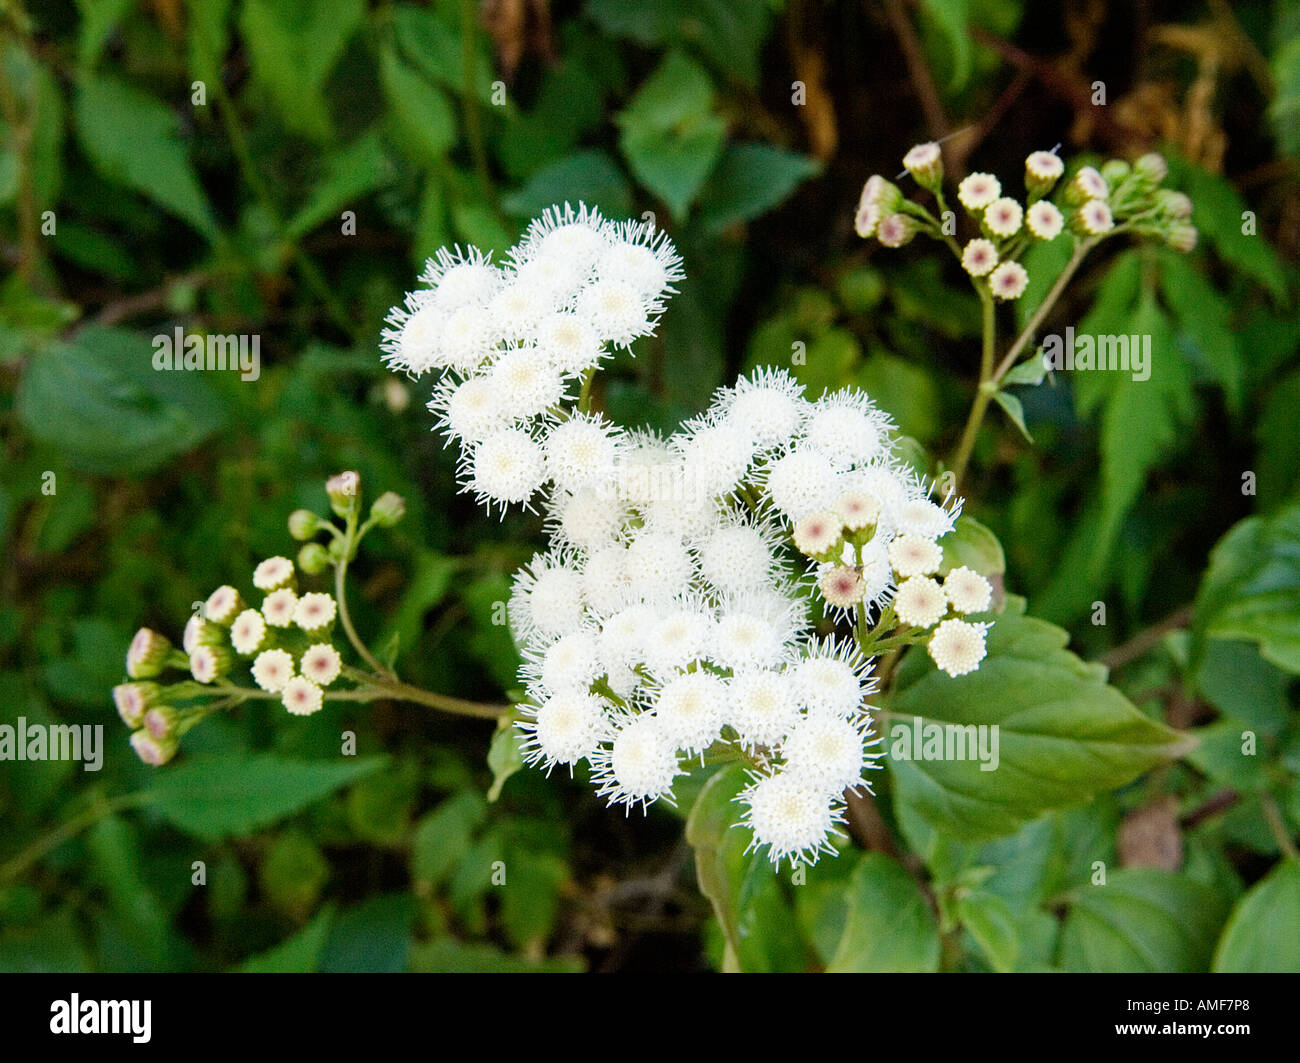 White flowers and leaves of Crofton weed, Ageratina adenophora. Island of La Gomera, Canary Islands. Stock Photo